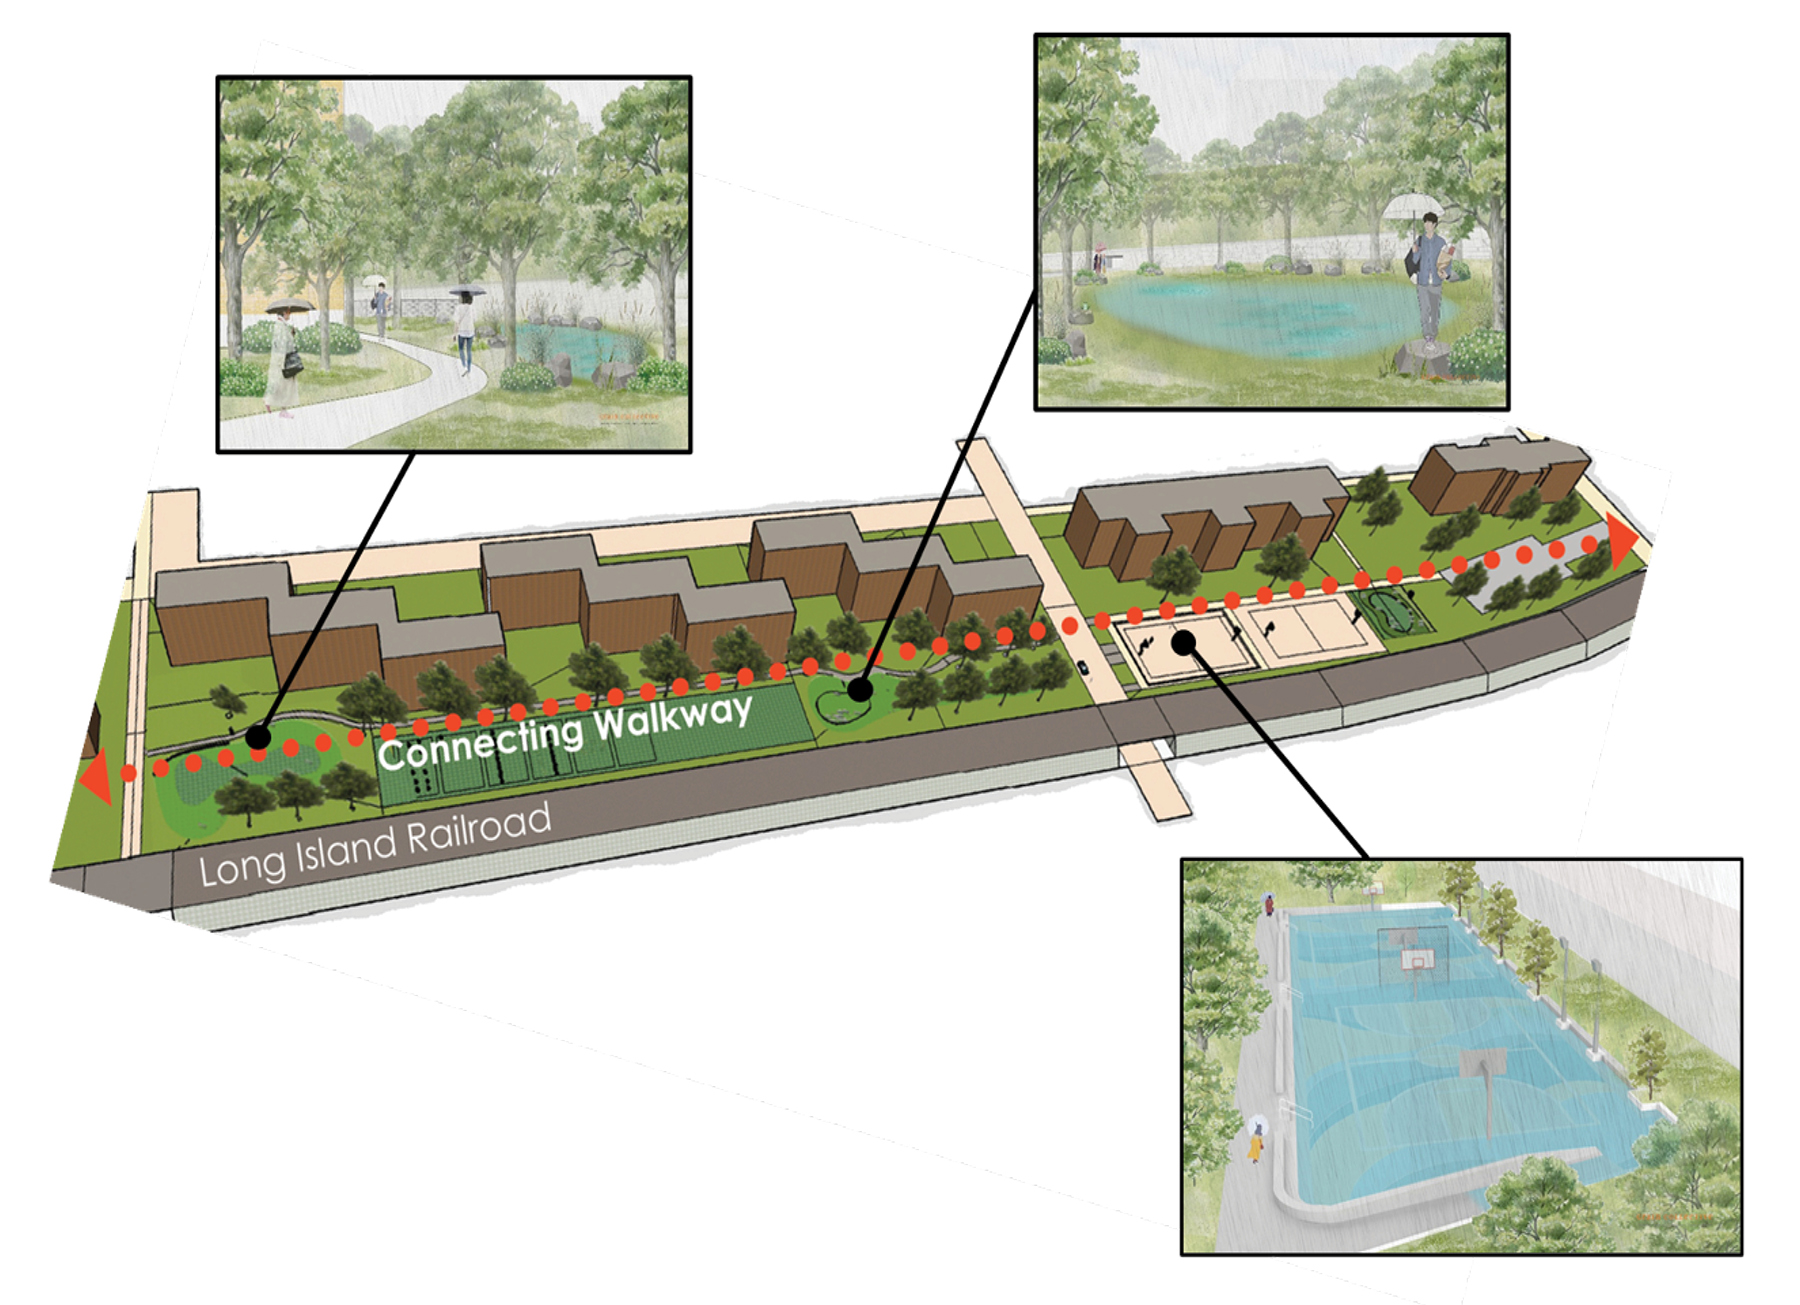 For its first cloudburst management project, New York City will direct stormwater runoff to grassy areas and a basketball court in a housing project in Queens to control flooding associated with sudden, intense downpours. (Image courtesy of New York City Department of Environmental Protection)